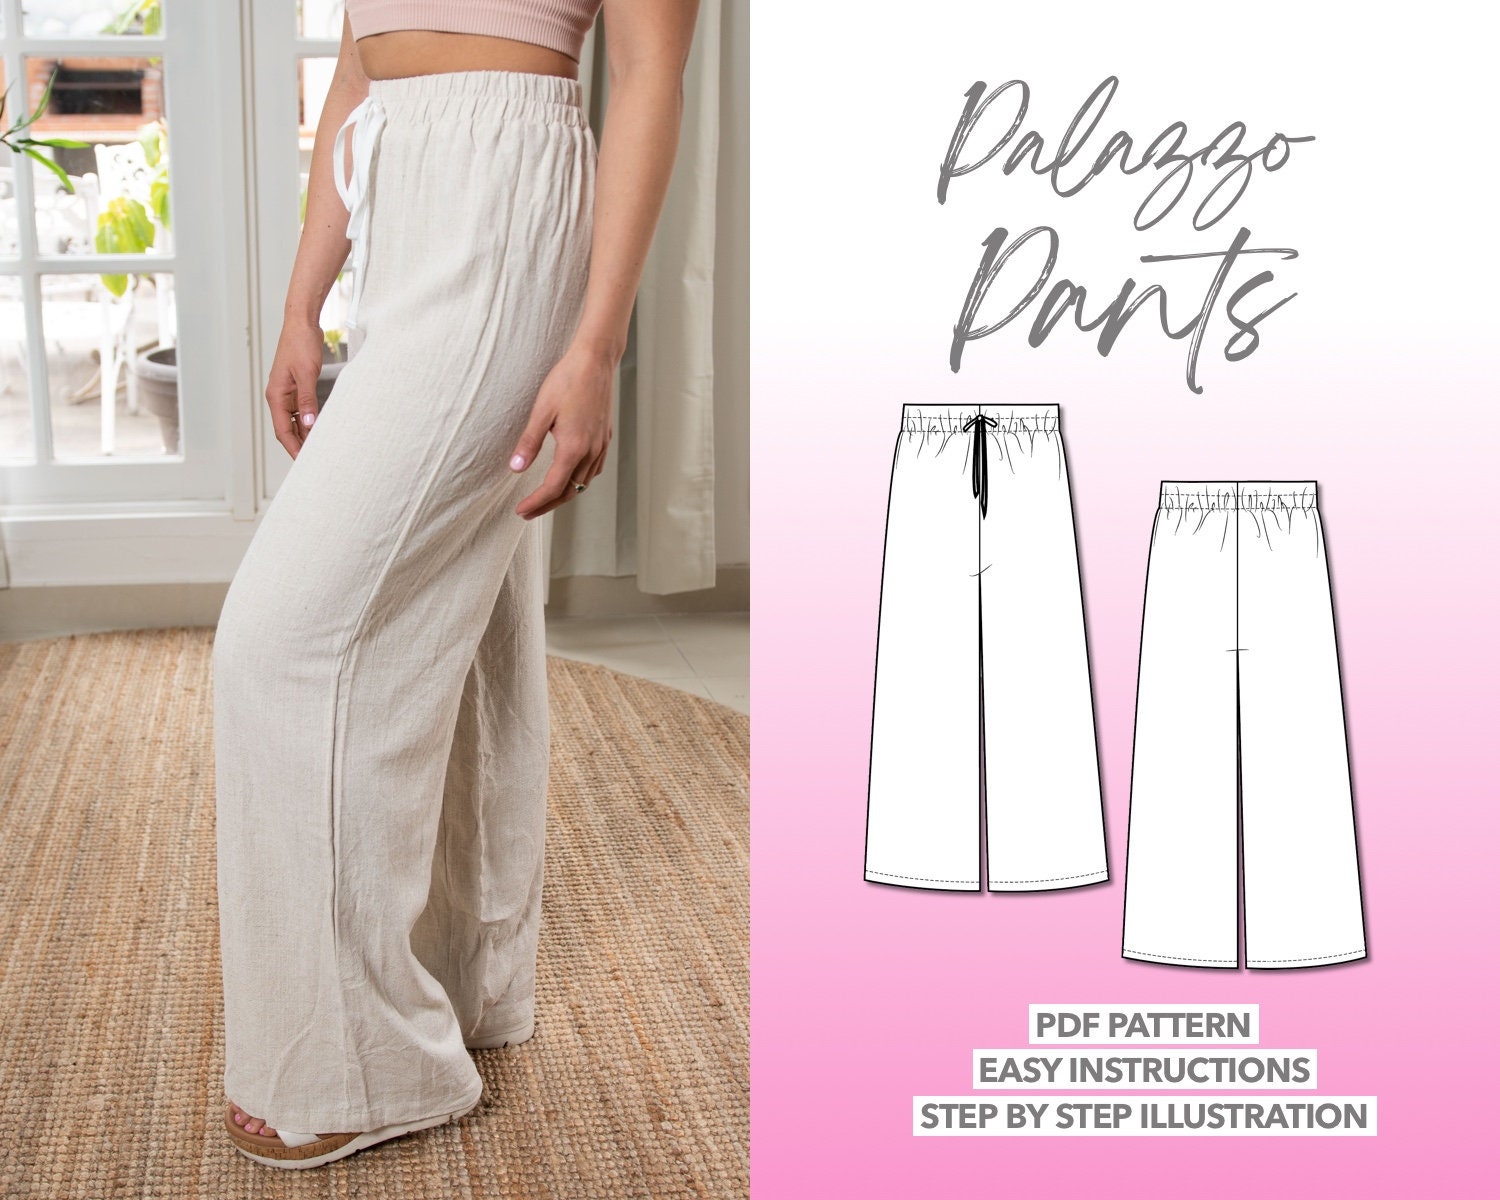 Palazzo Pants PATTERN Digital Pdf Video Tutorial, Wide Leg Trousers,  Adjustable, Drawstring, Pleated, Front Pleat, Tailored, Sewing -  Canada